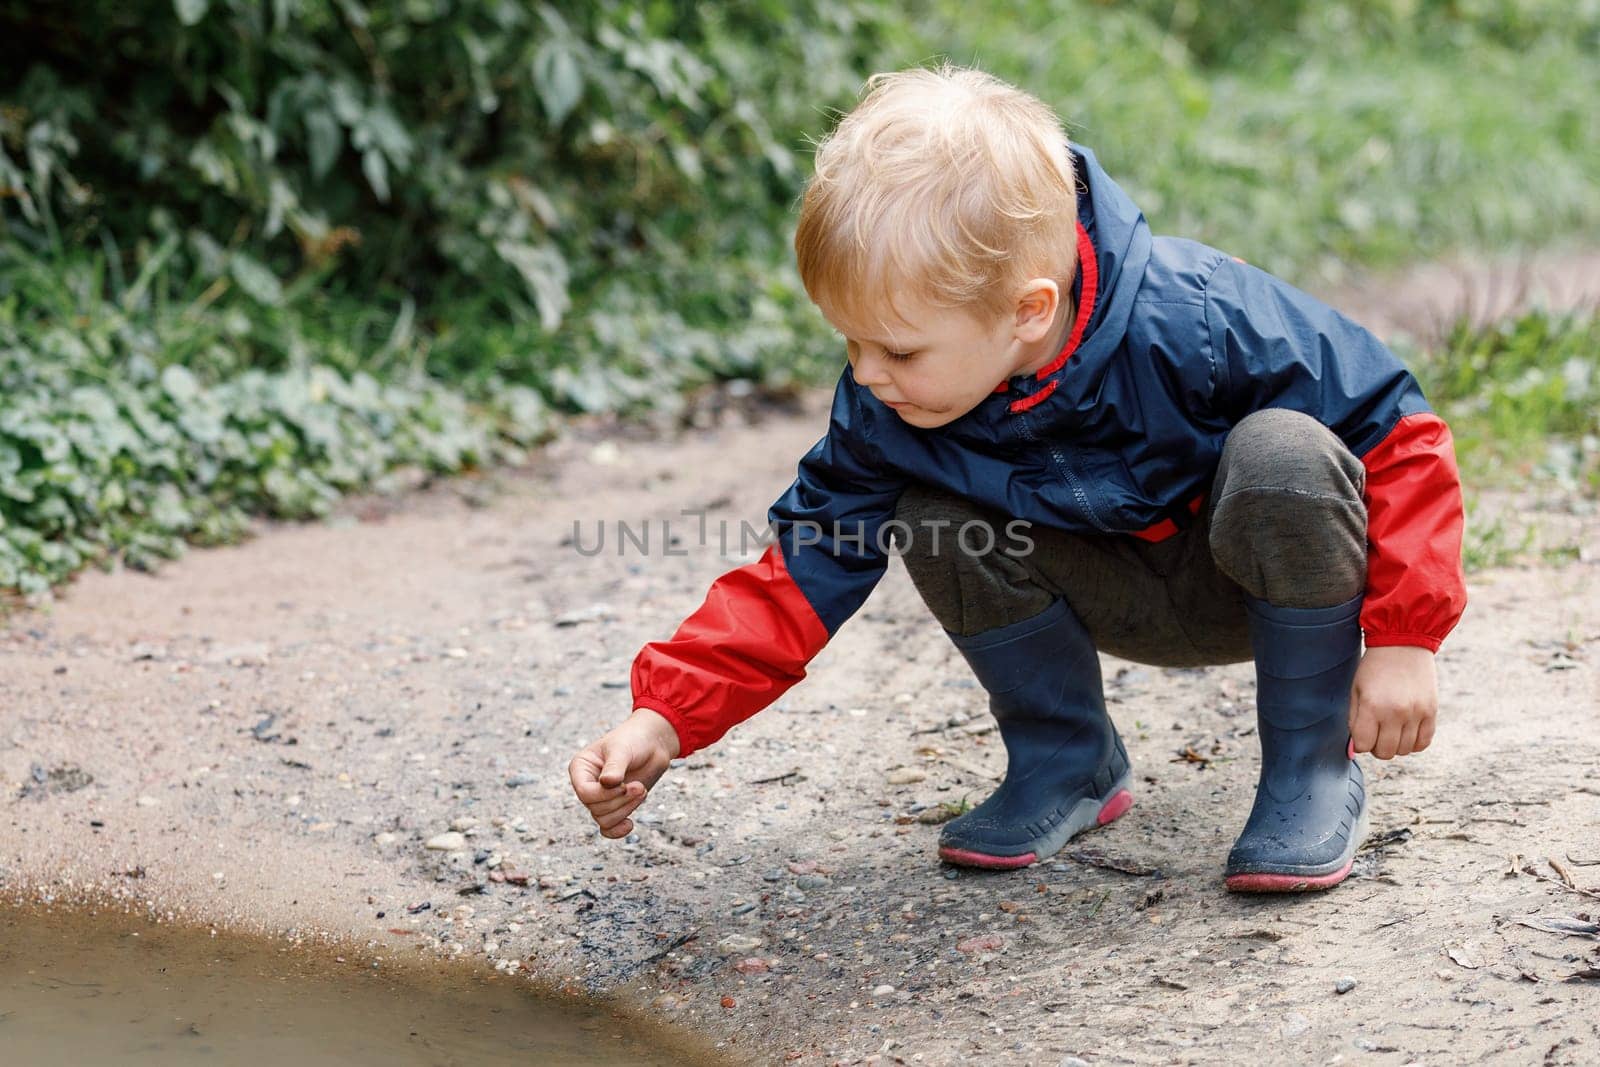 A child squat in a nature explores a dirty swamp, the little one smears his hands and face by Lincikas